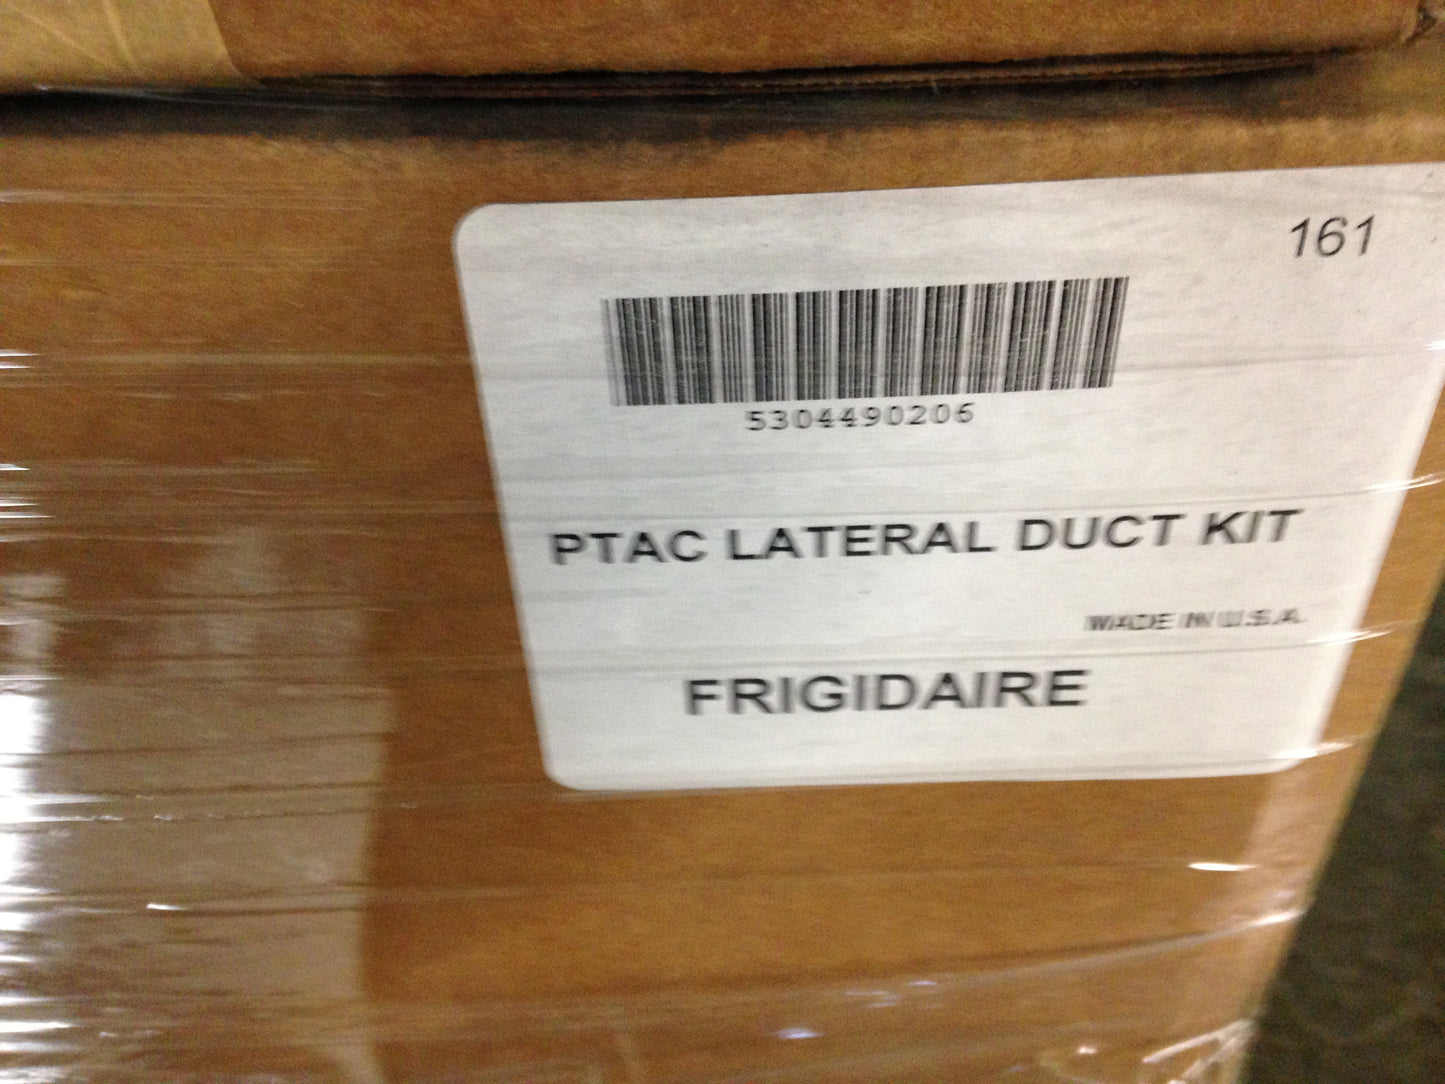 PTAC LATERAL DUCT KIT